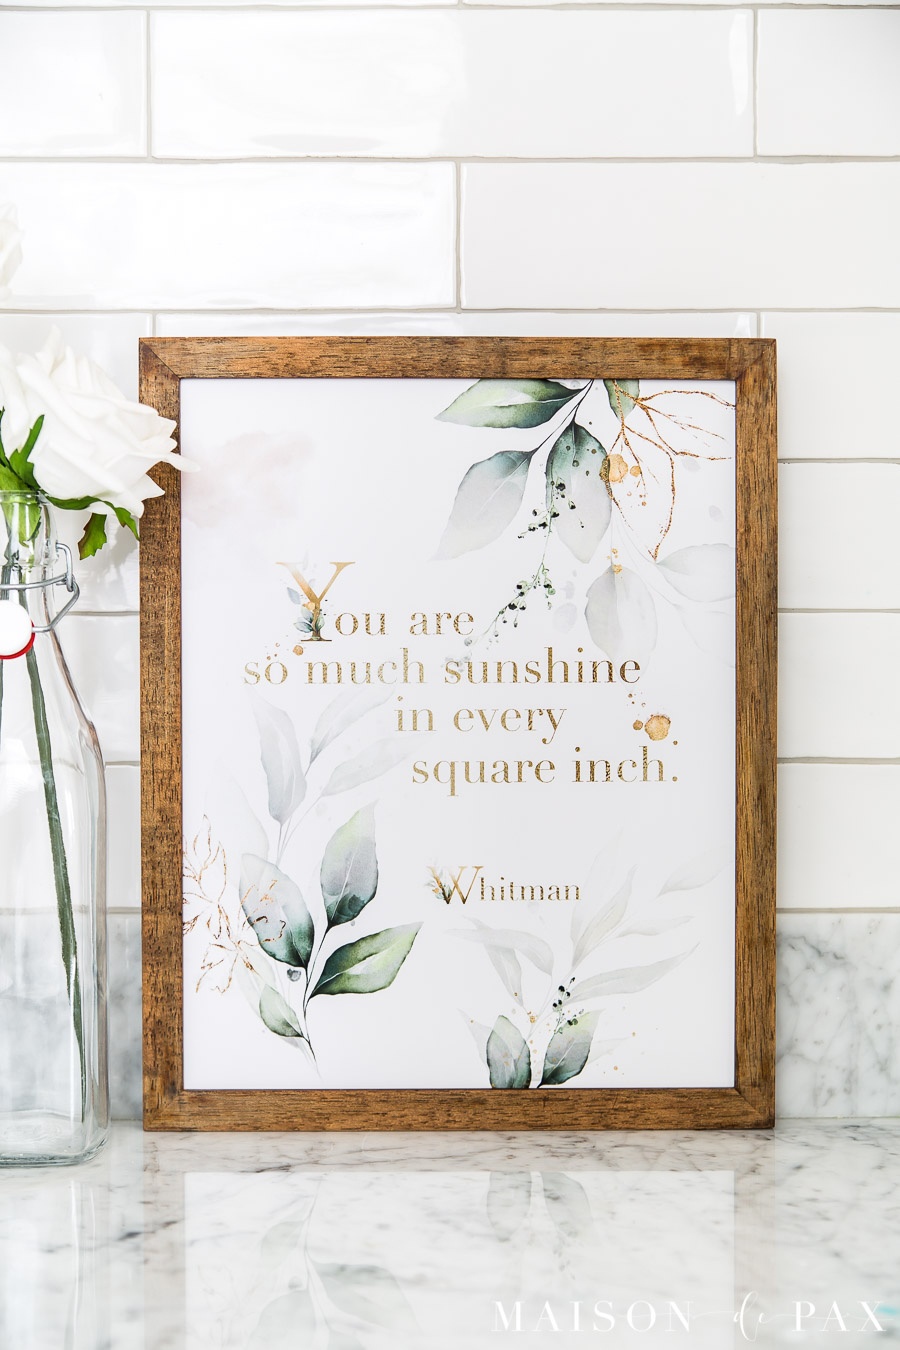 So Much Sunshine Printable Wall Art - Maison De Pax - Free Printable Wall Art Quotes